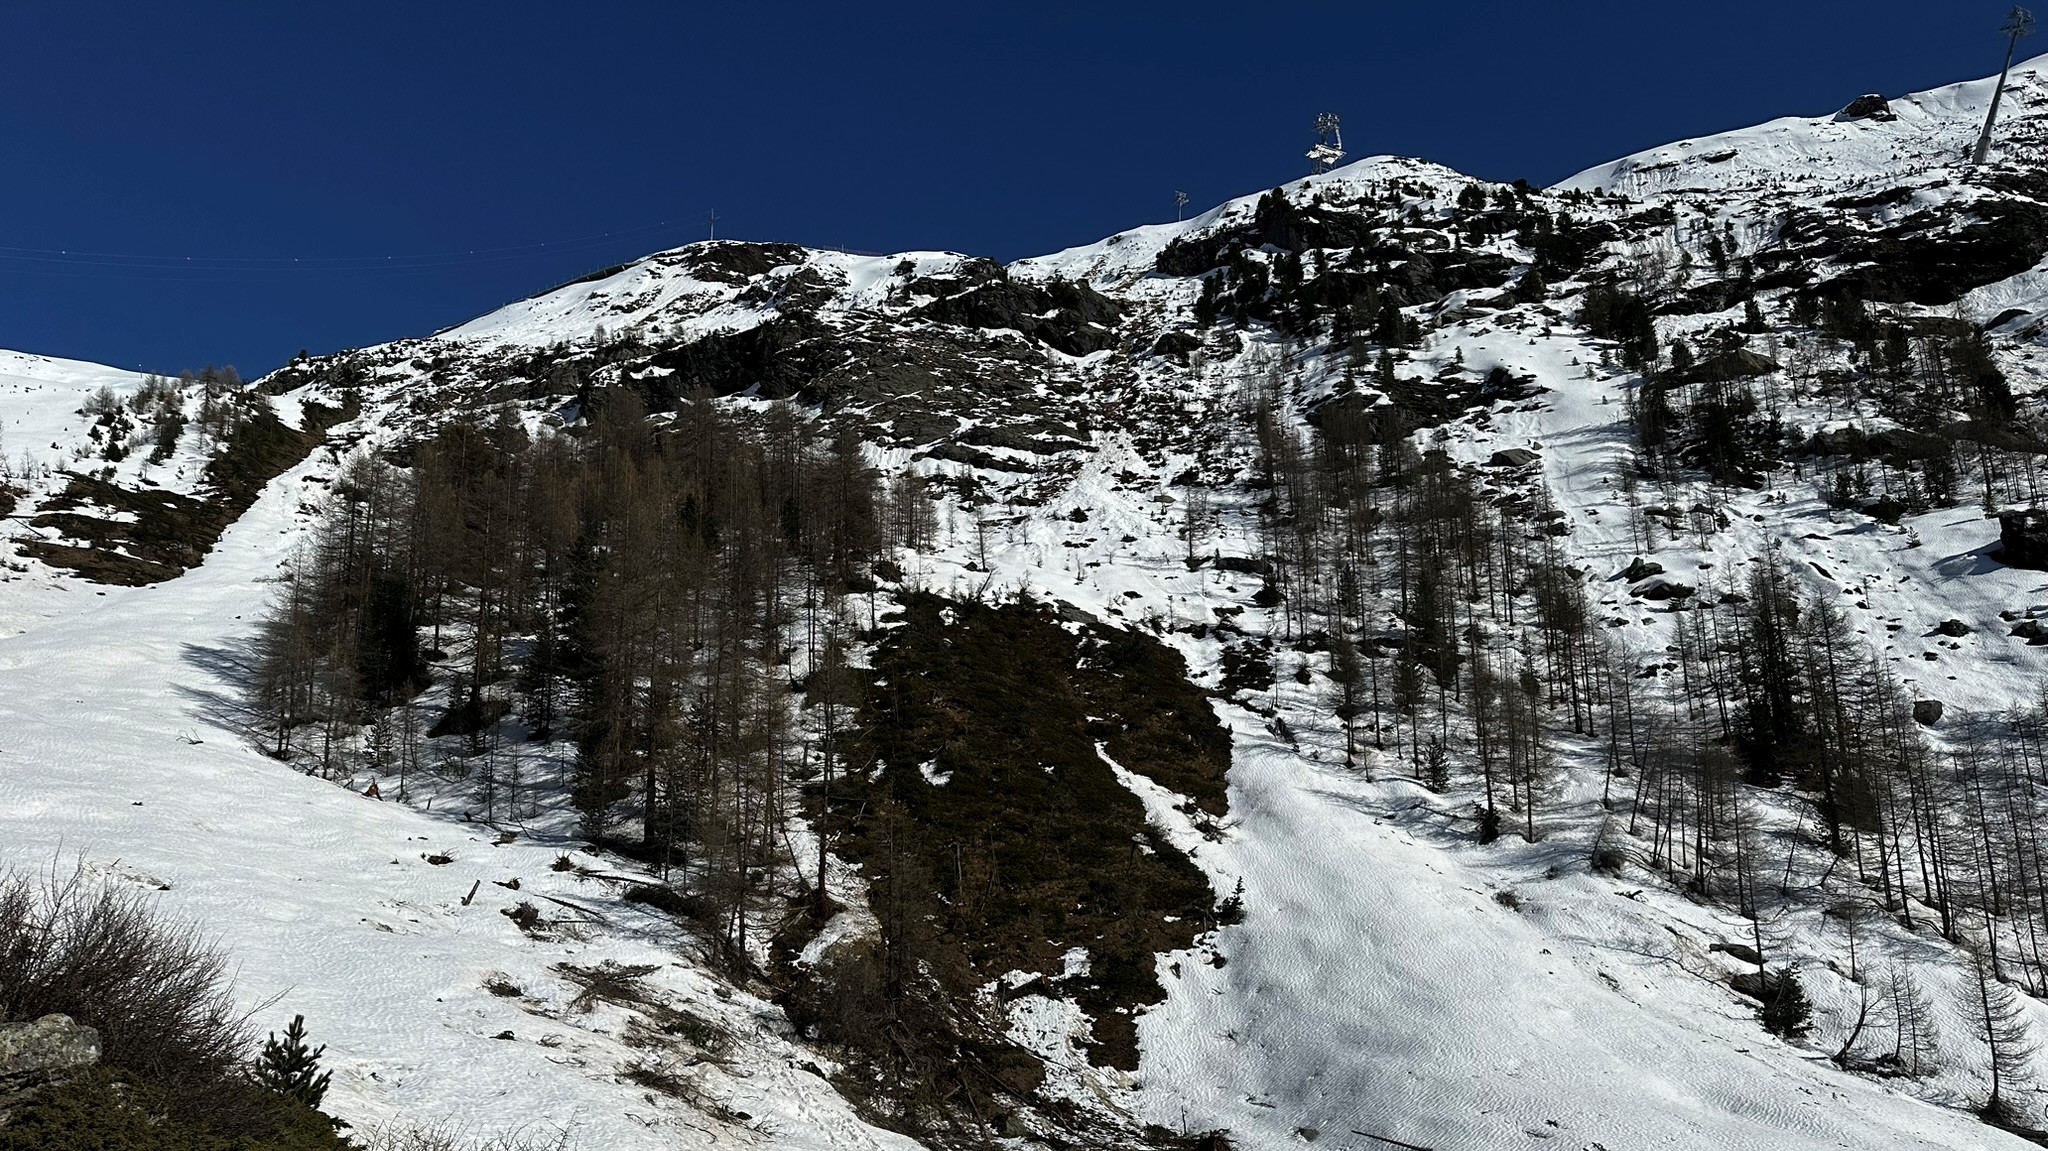 The body was discovered by a member of the Valais police who was hiking in the Riffelberg ski area on May 10.